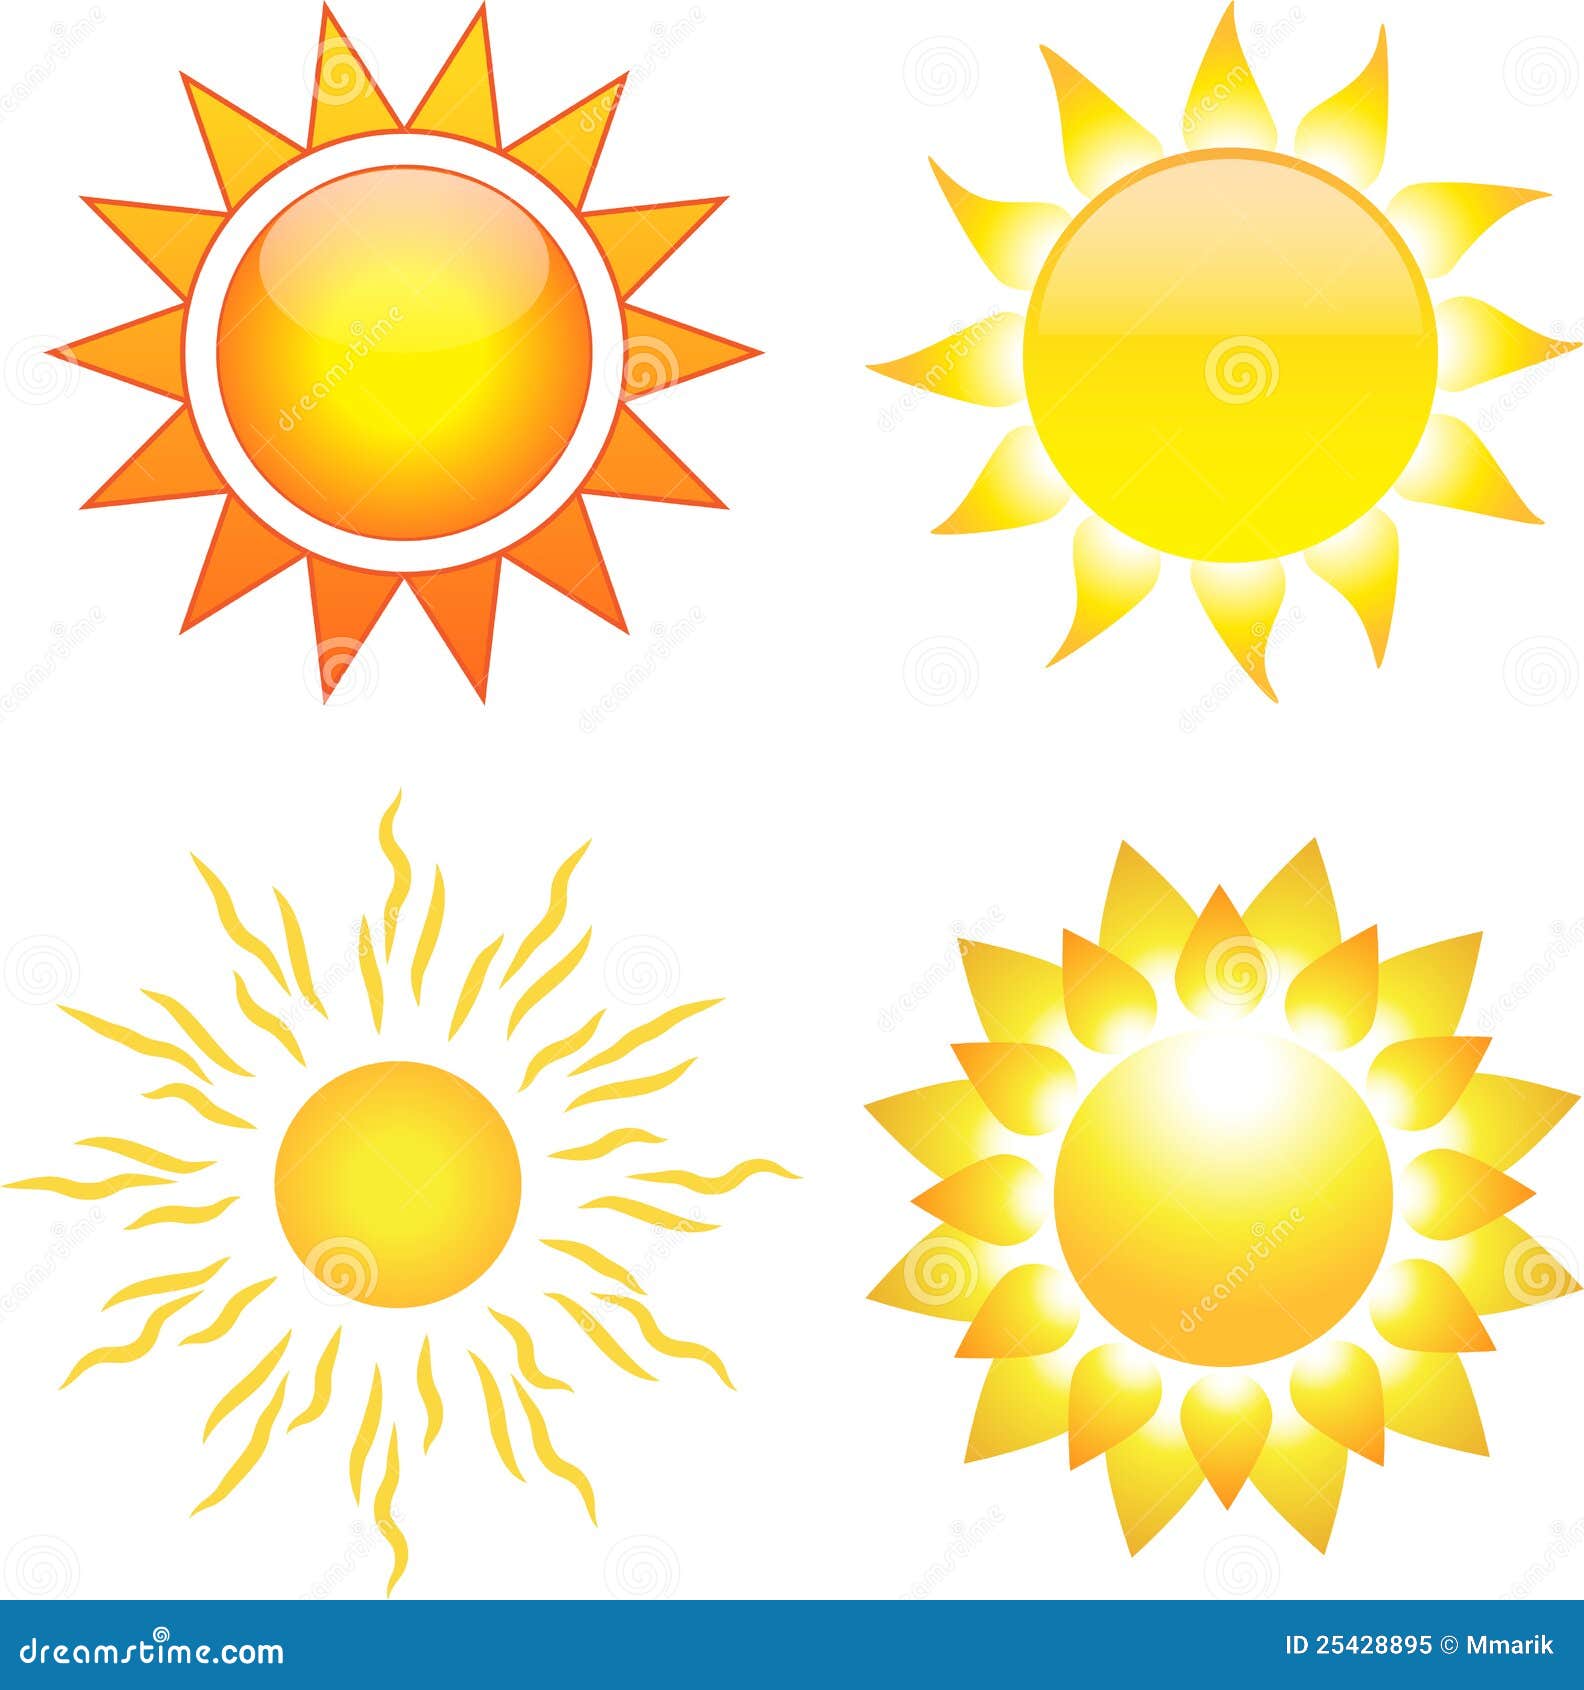 Set of sun images stock vector. Illustration of element - 25428895